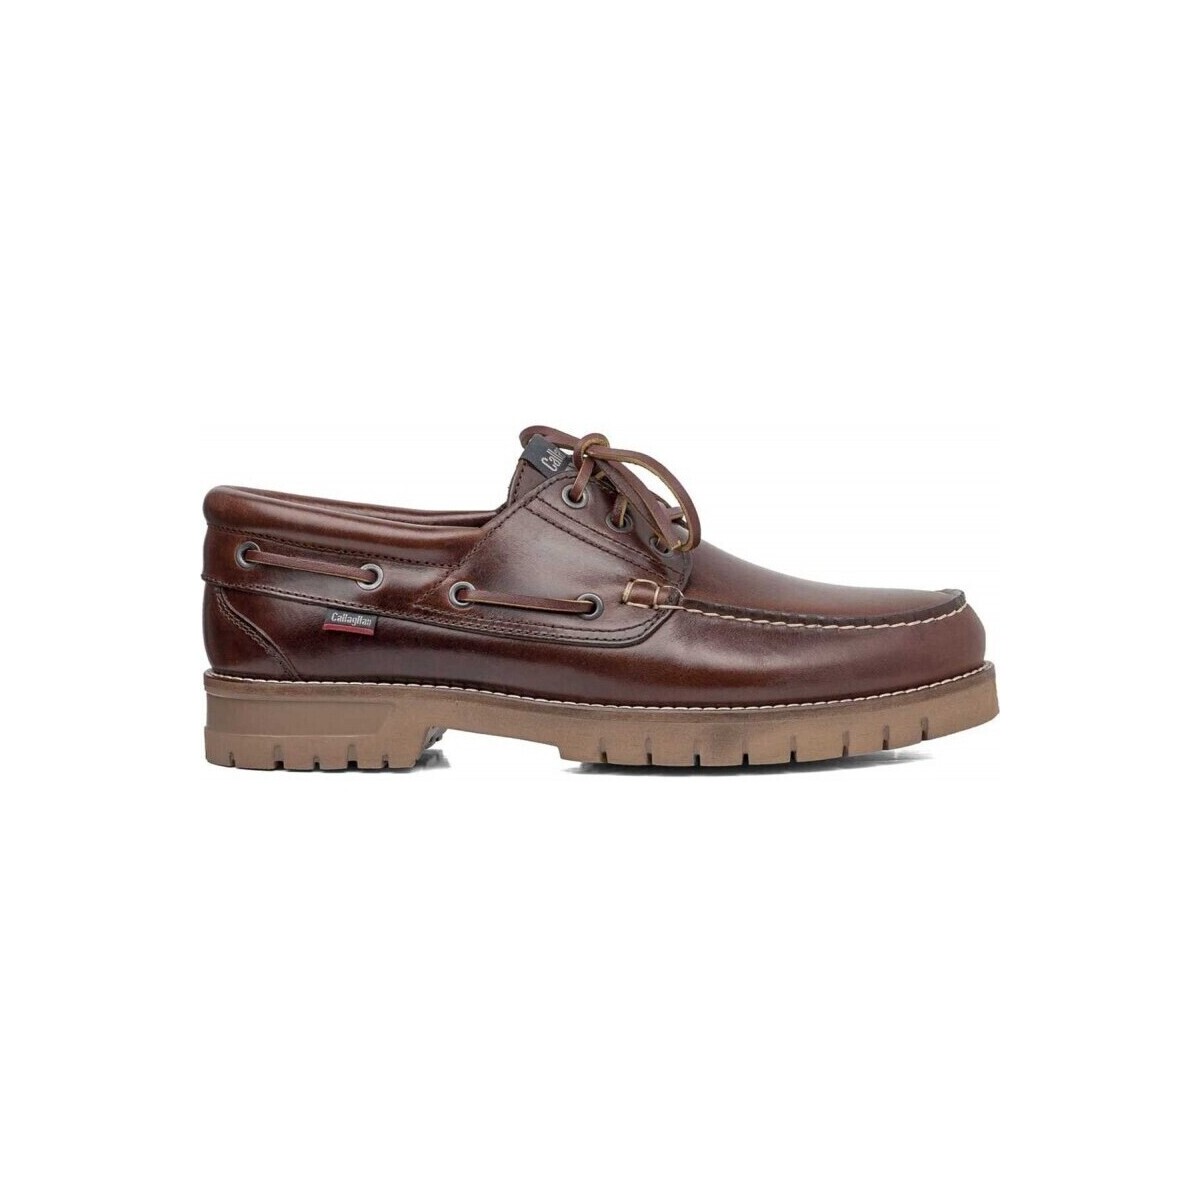 Boat shoes CallagHan 24148-24